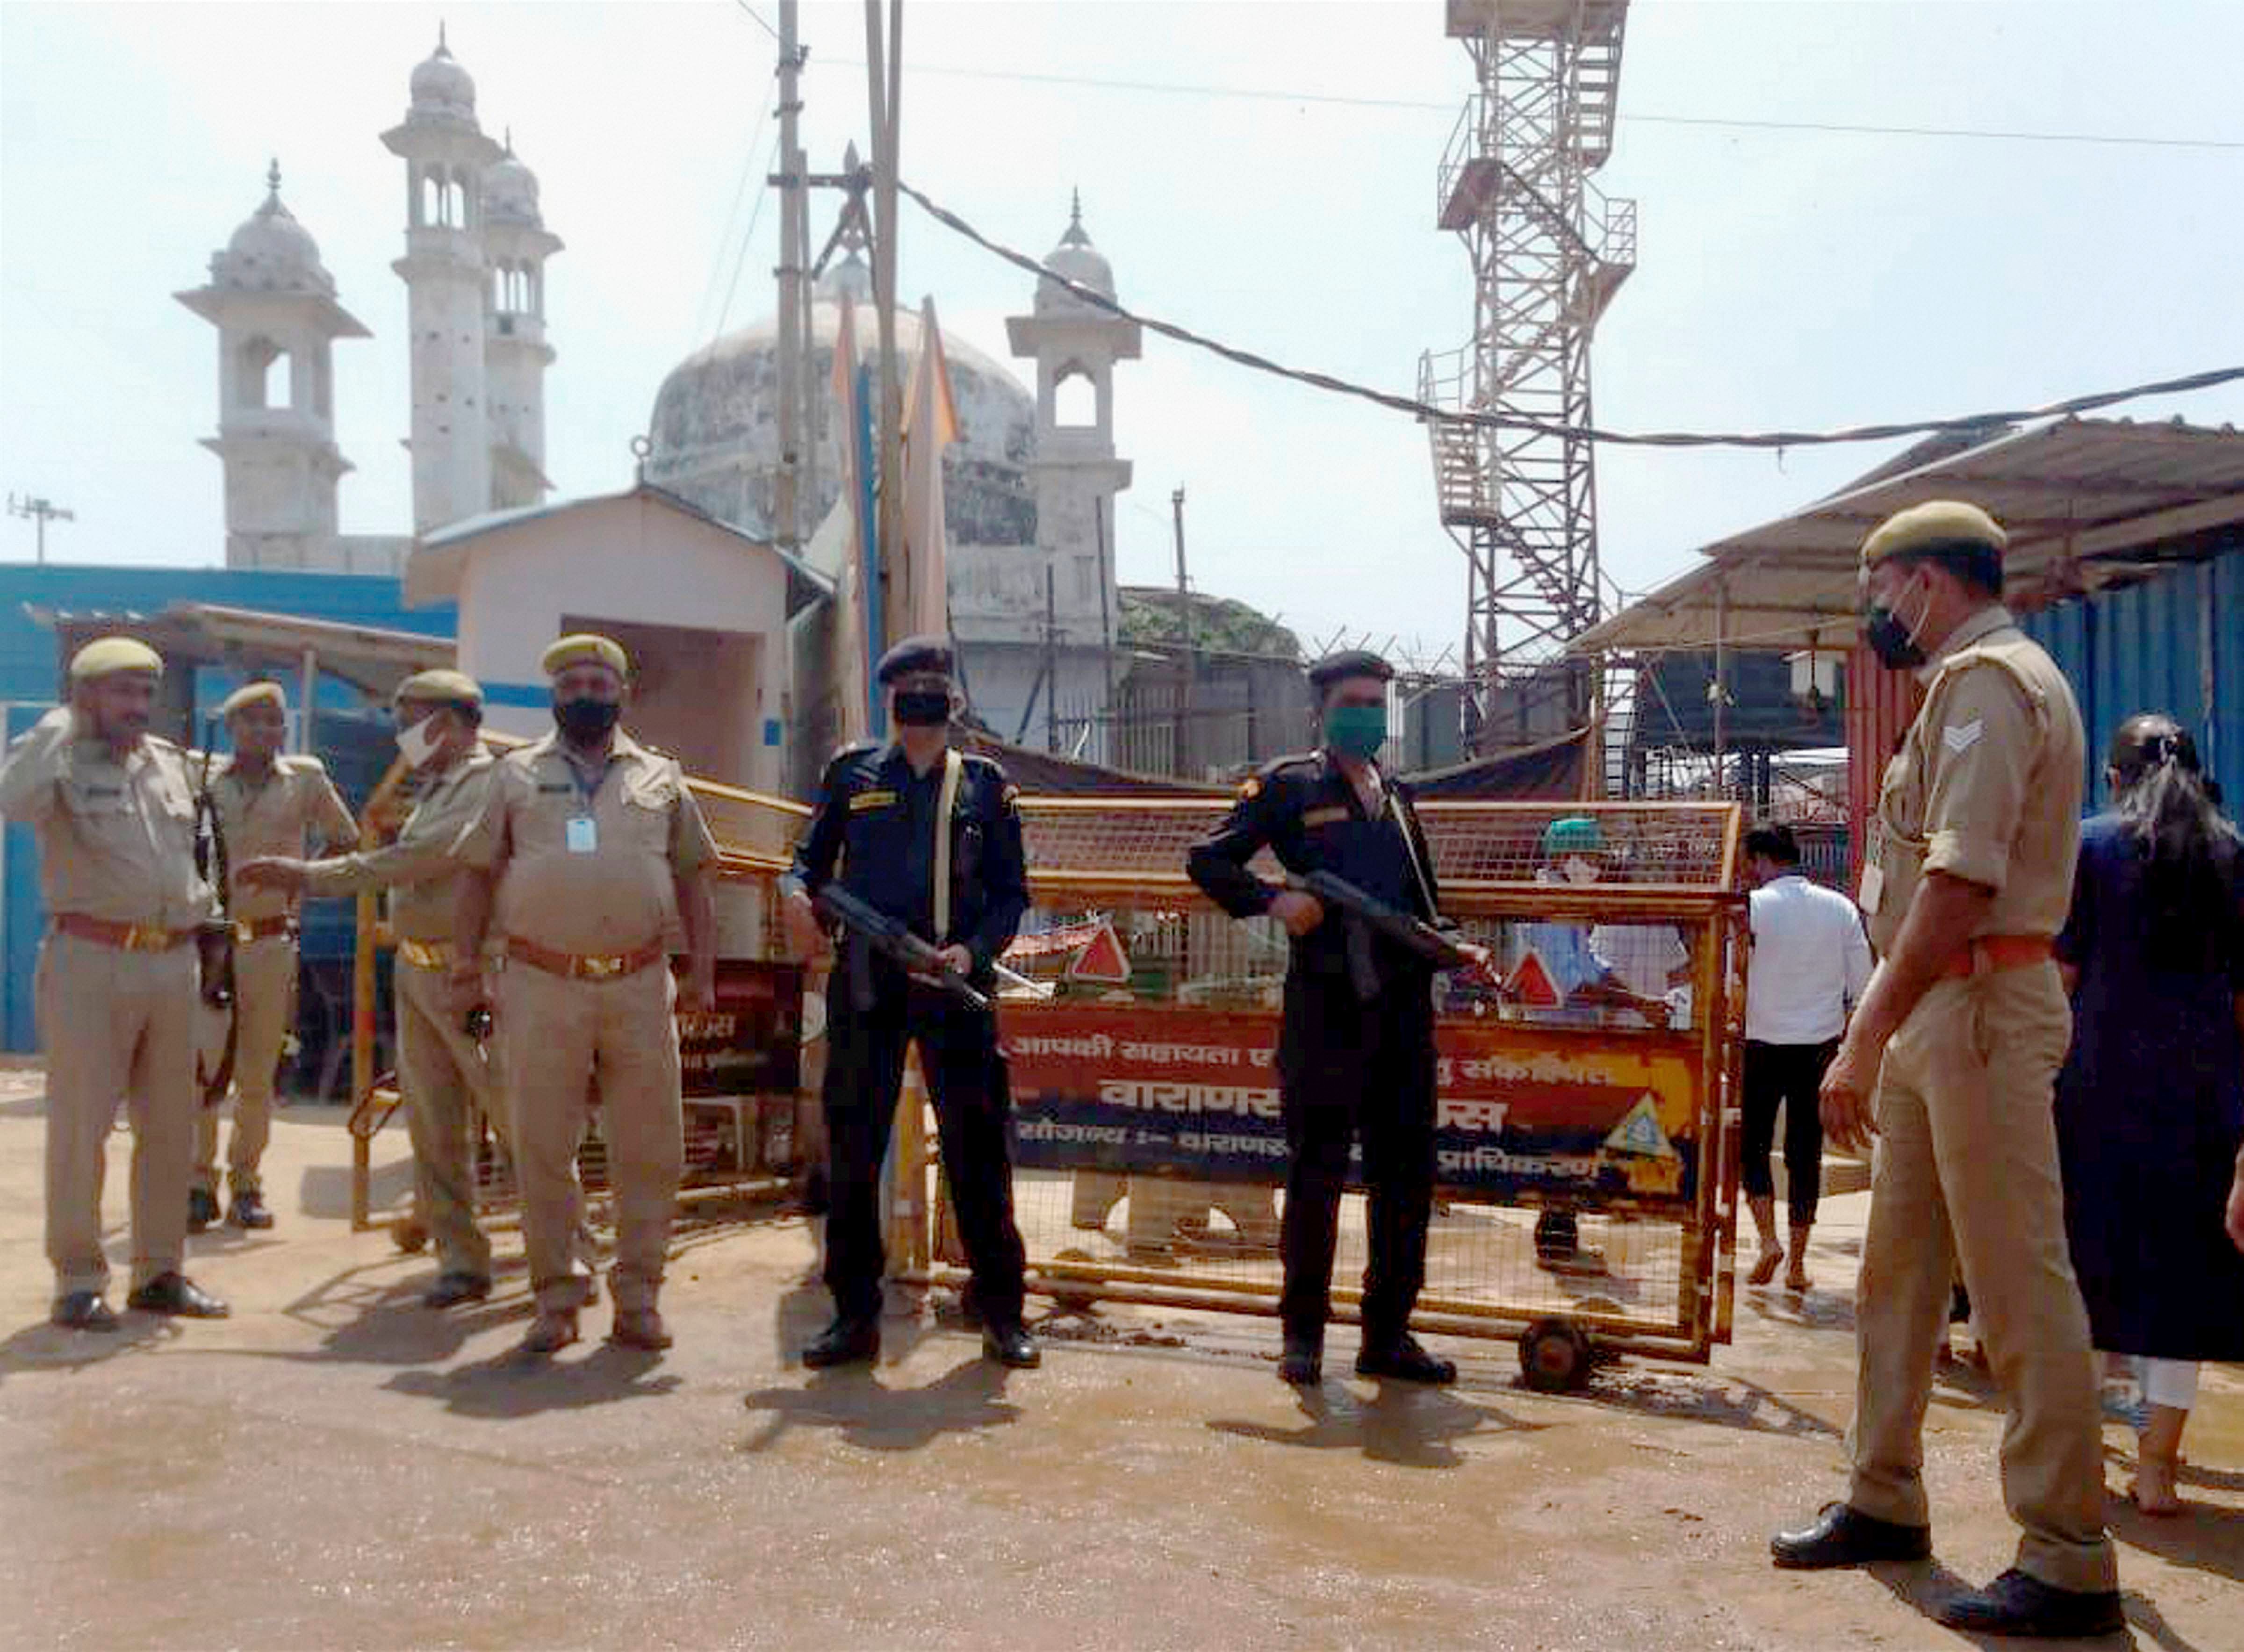 Enhanced security outside Kashi Vishwanath temple and Gyanvapi mosque after the verdict on Babri mosque demolition case by the special CBI court, in Varanasi, Wednesday, Sept. 30, 2020. Credit: PTI Photo